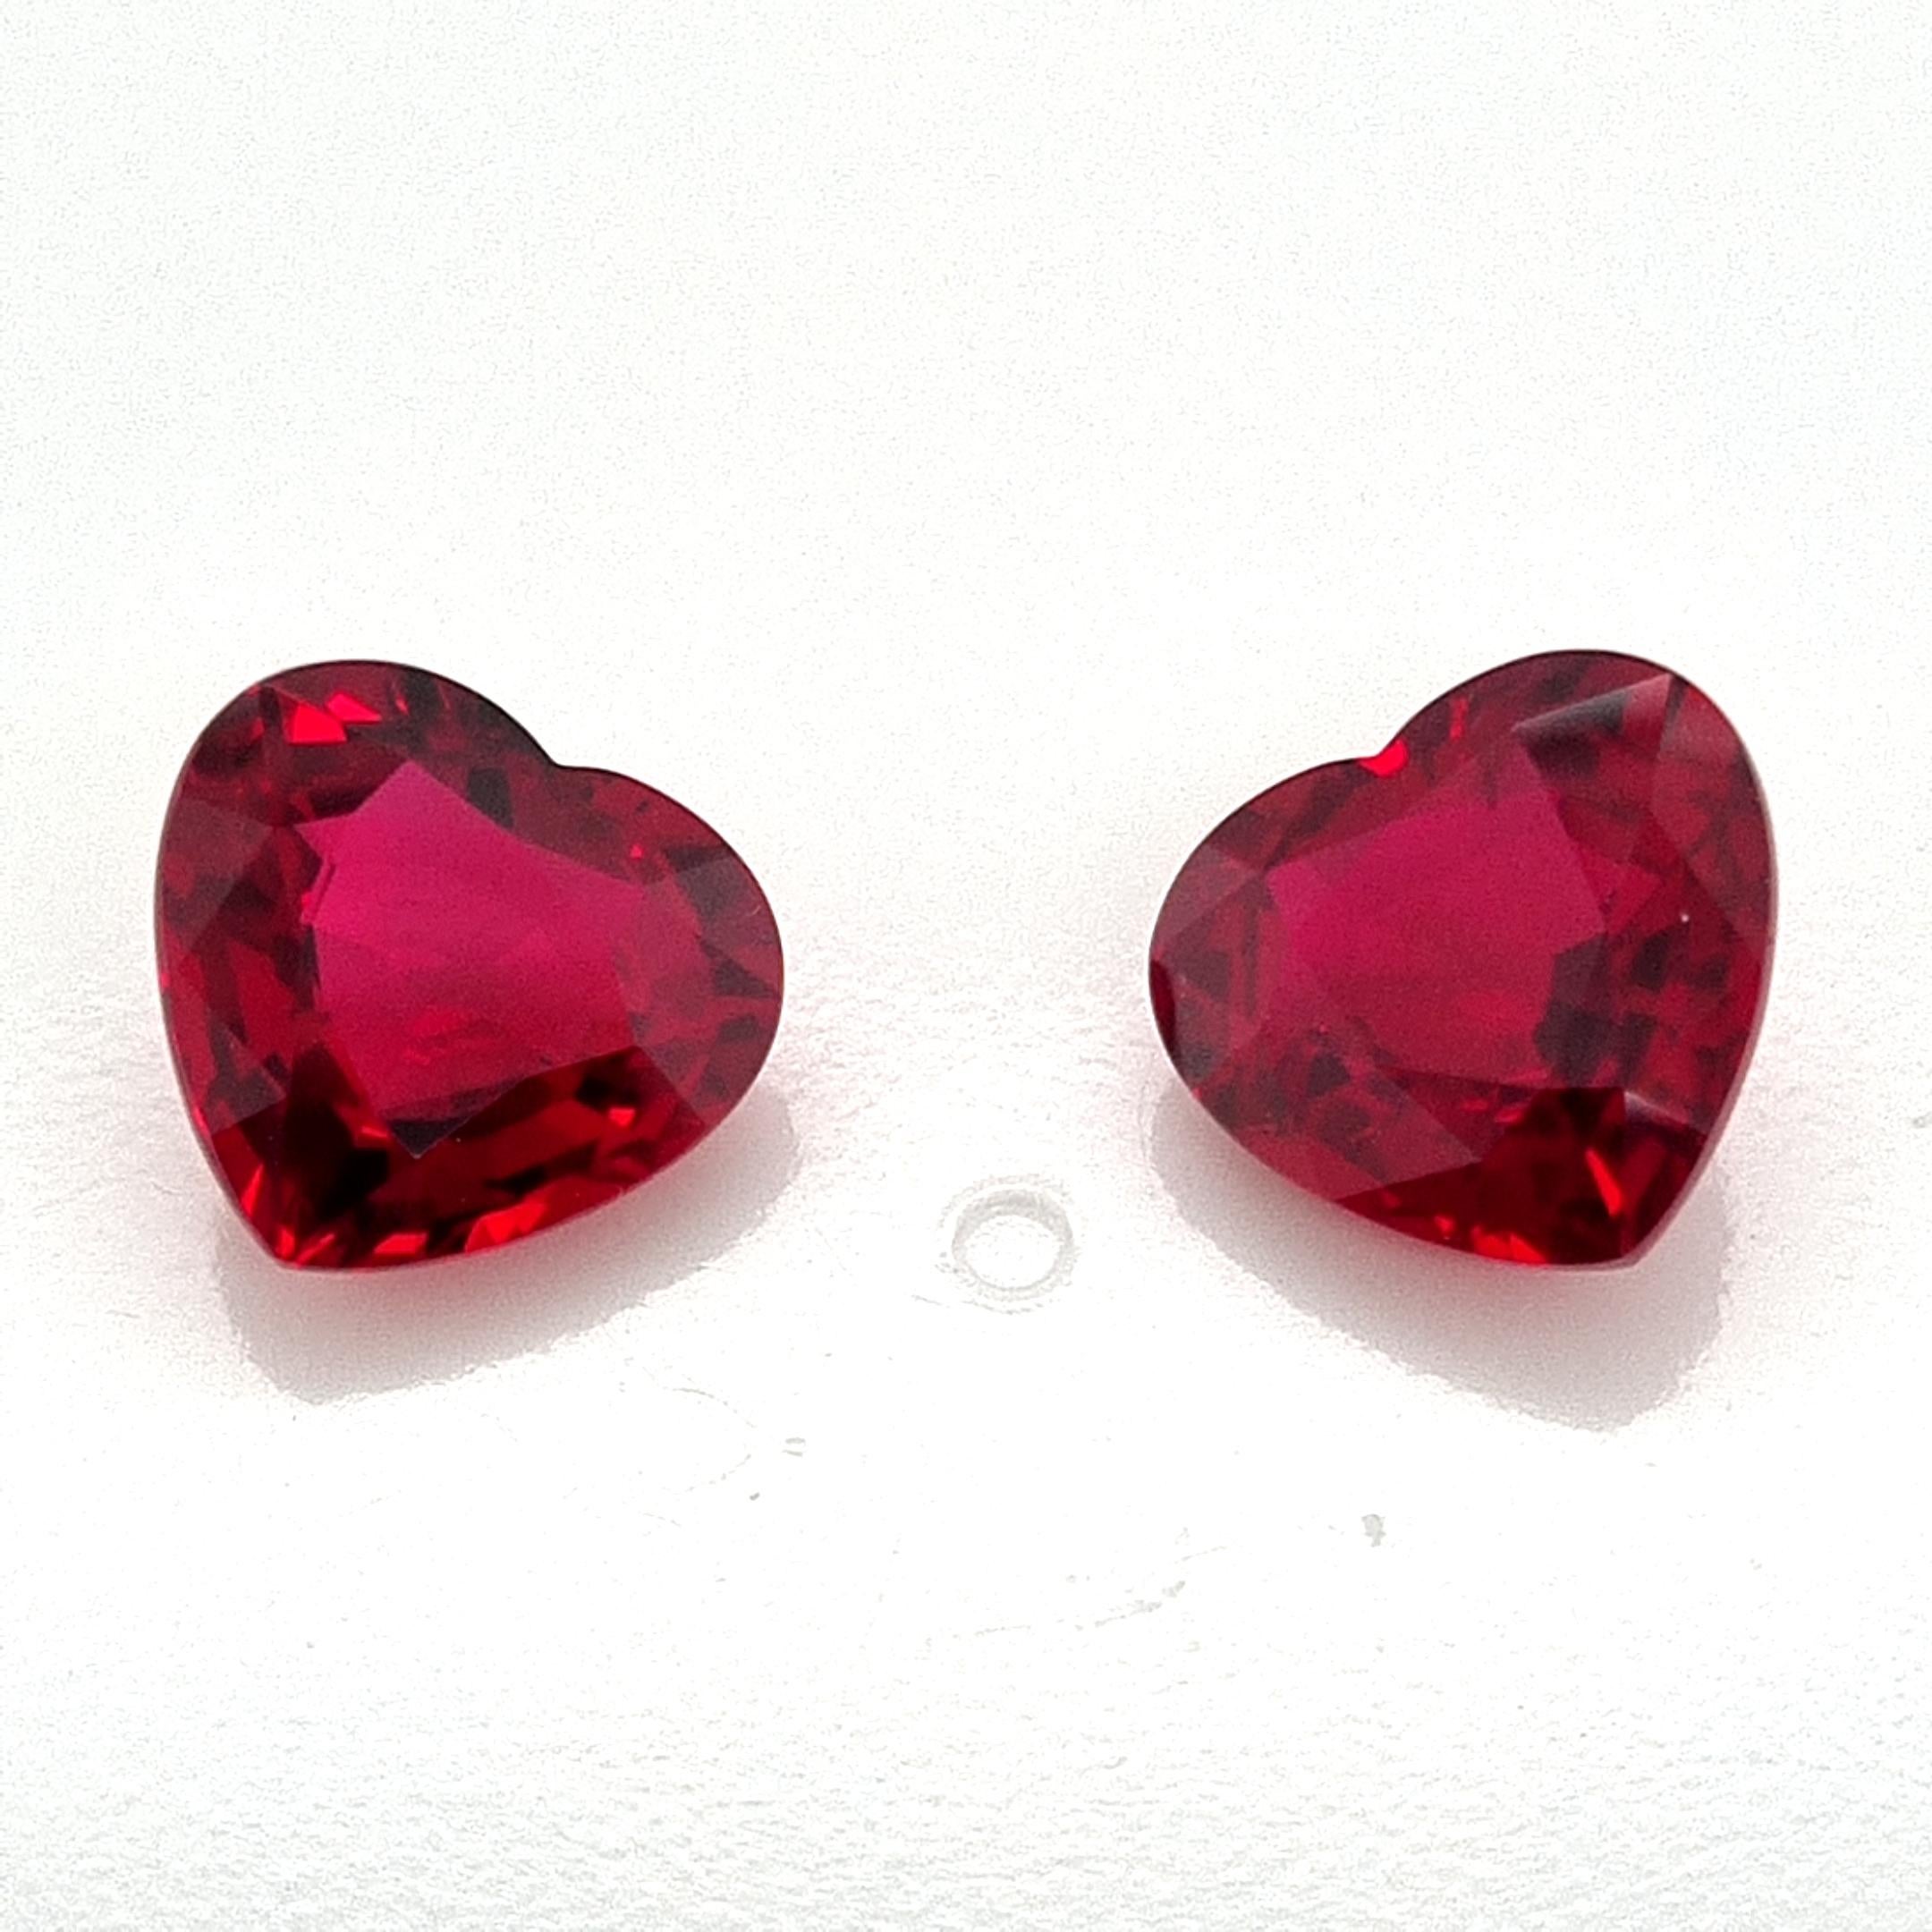 This 10 carat Pair of Heated Heartshape Pigeons Blood Rubies are truly an exception to the norm. If you are looking to standout, look no further. 

Each Ruby weighs in excess of 5 carats and boasts a number of magnificent character traits. 

The